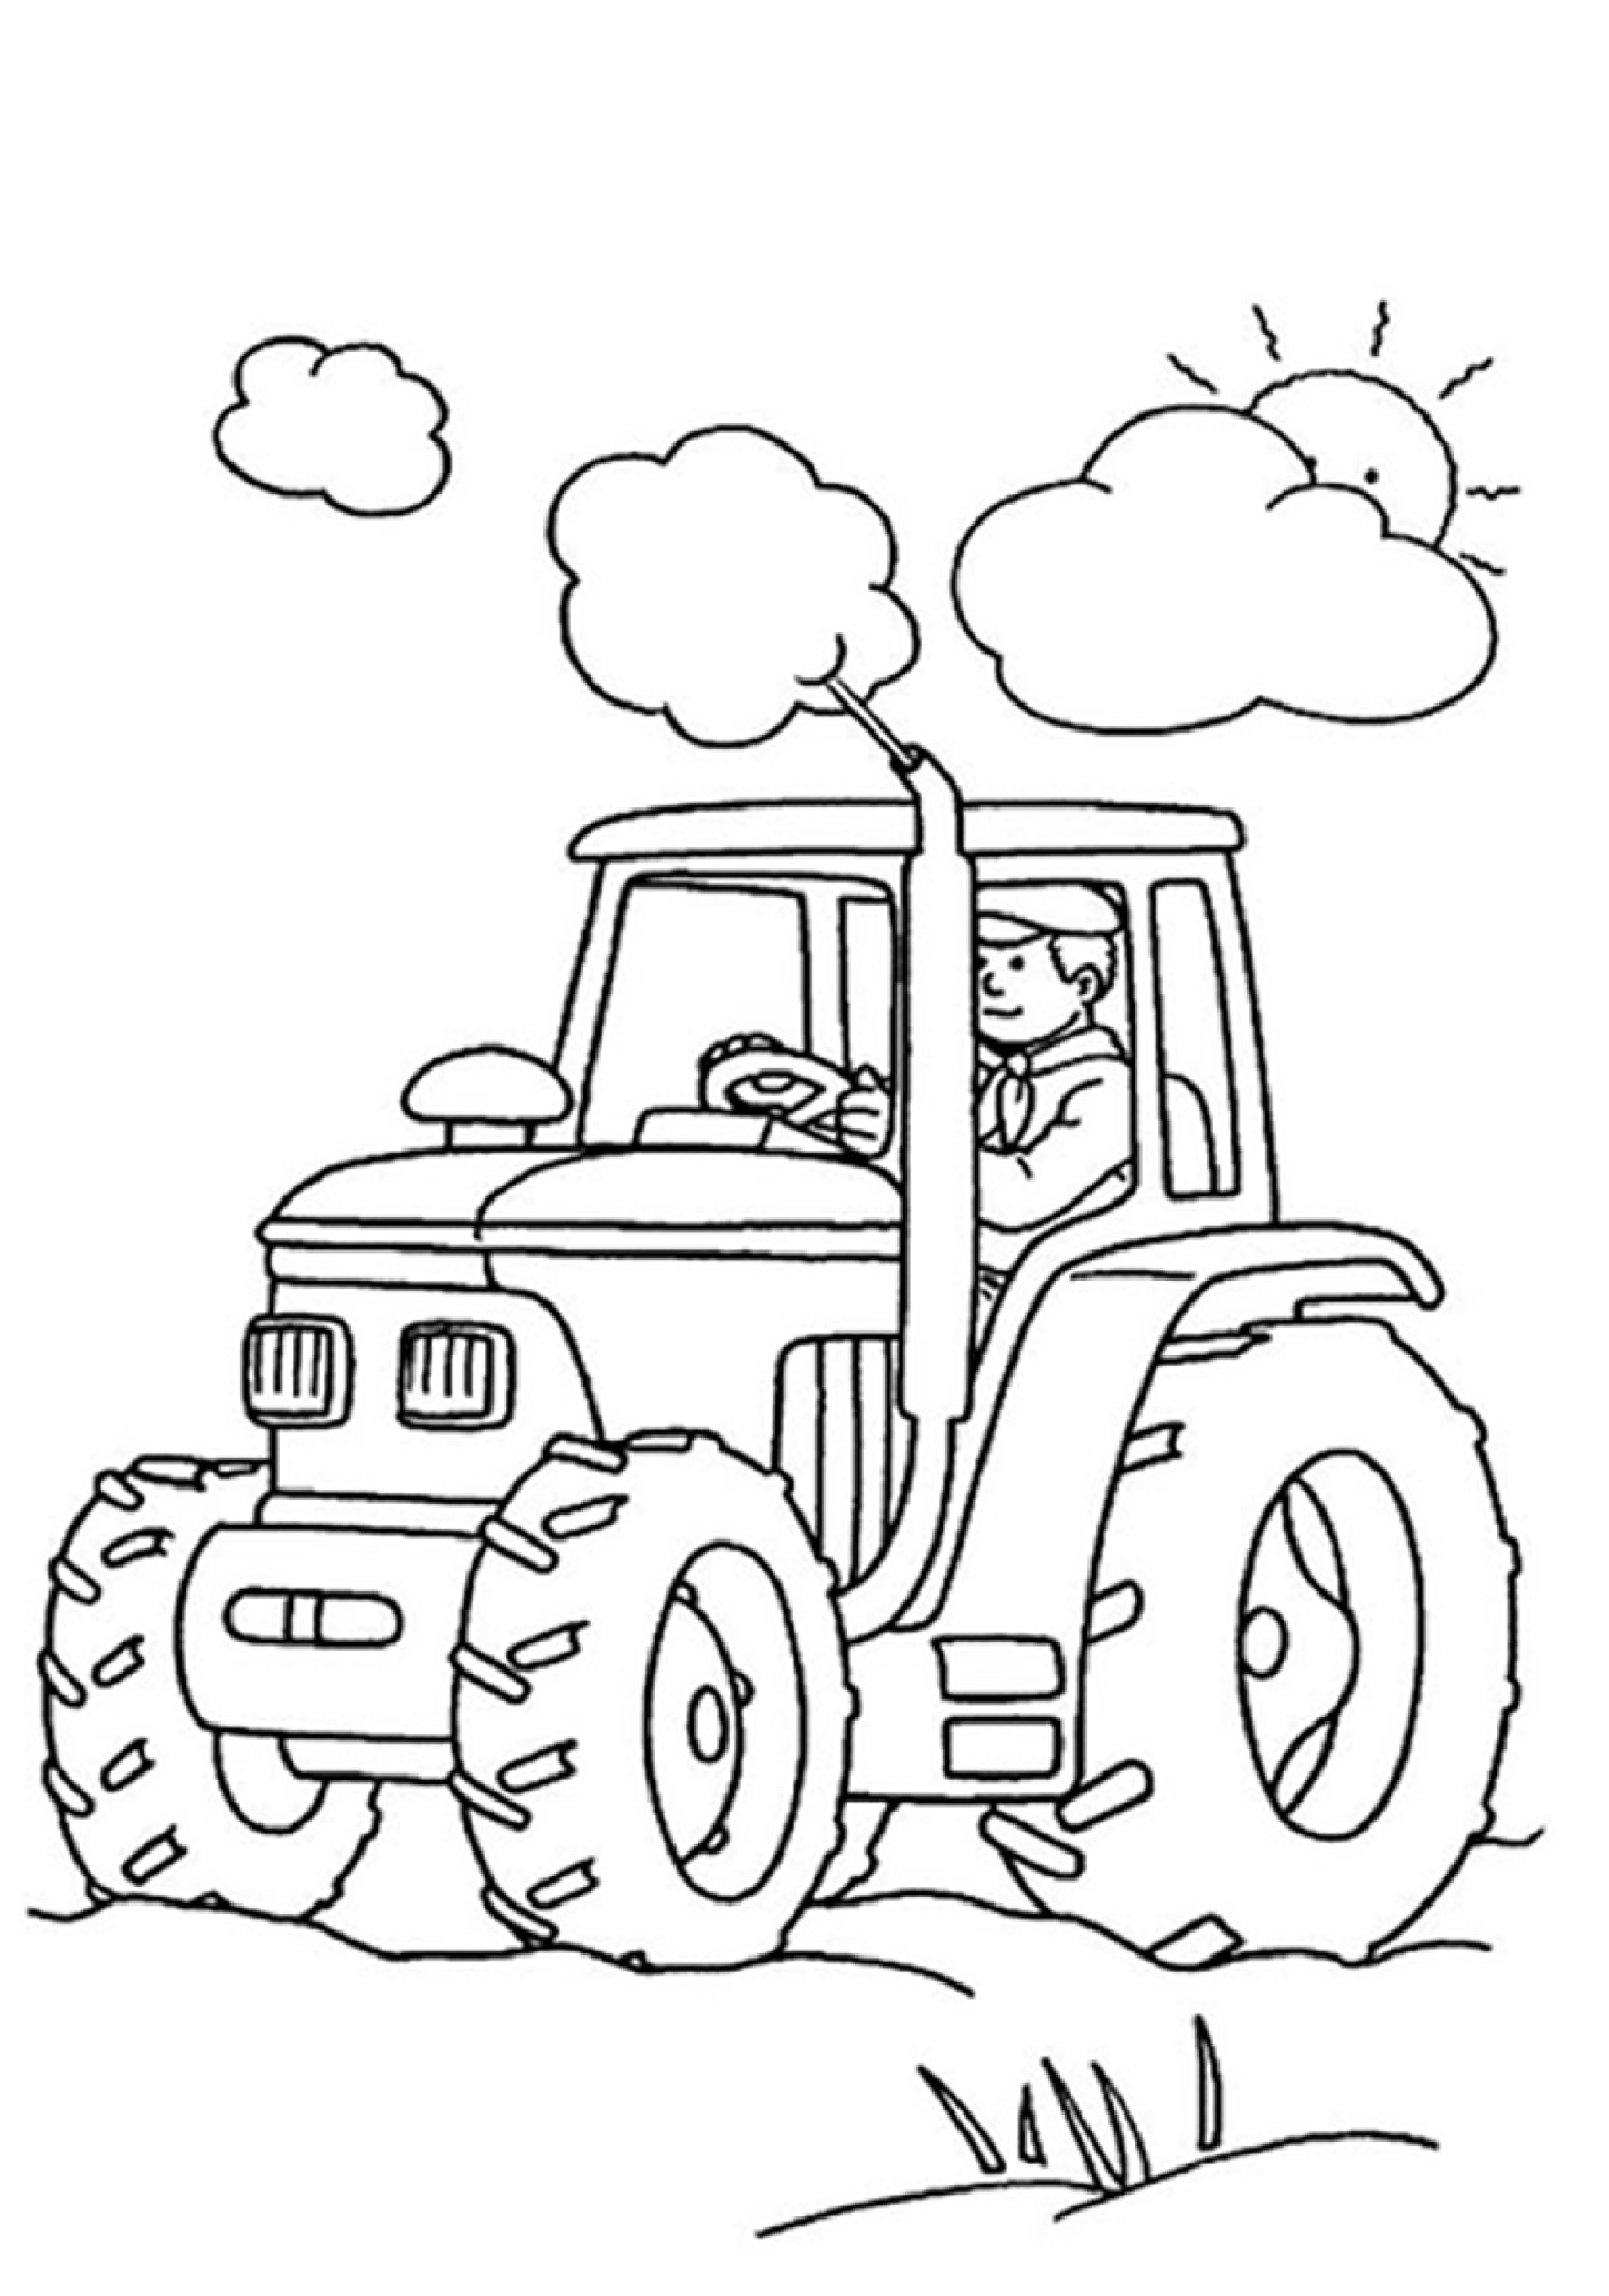 Toddler Coloring Pages Pdf
 Free printable coloring pages for kids